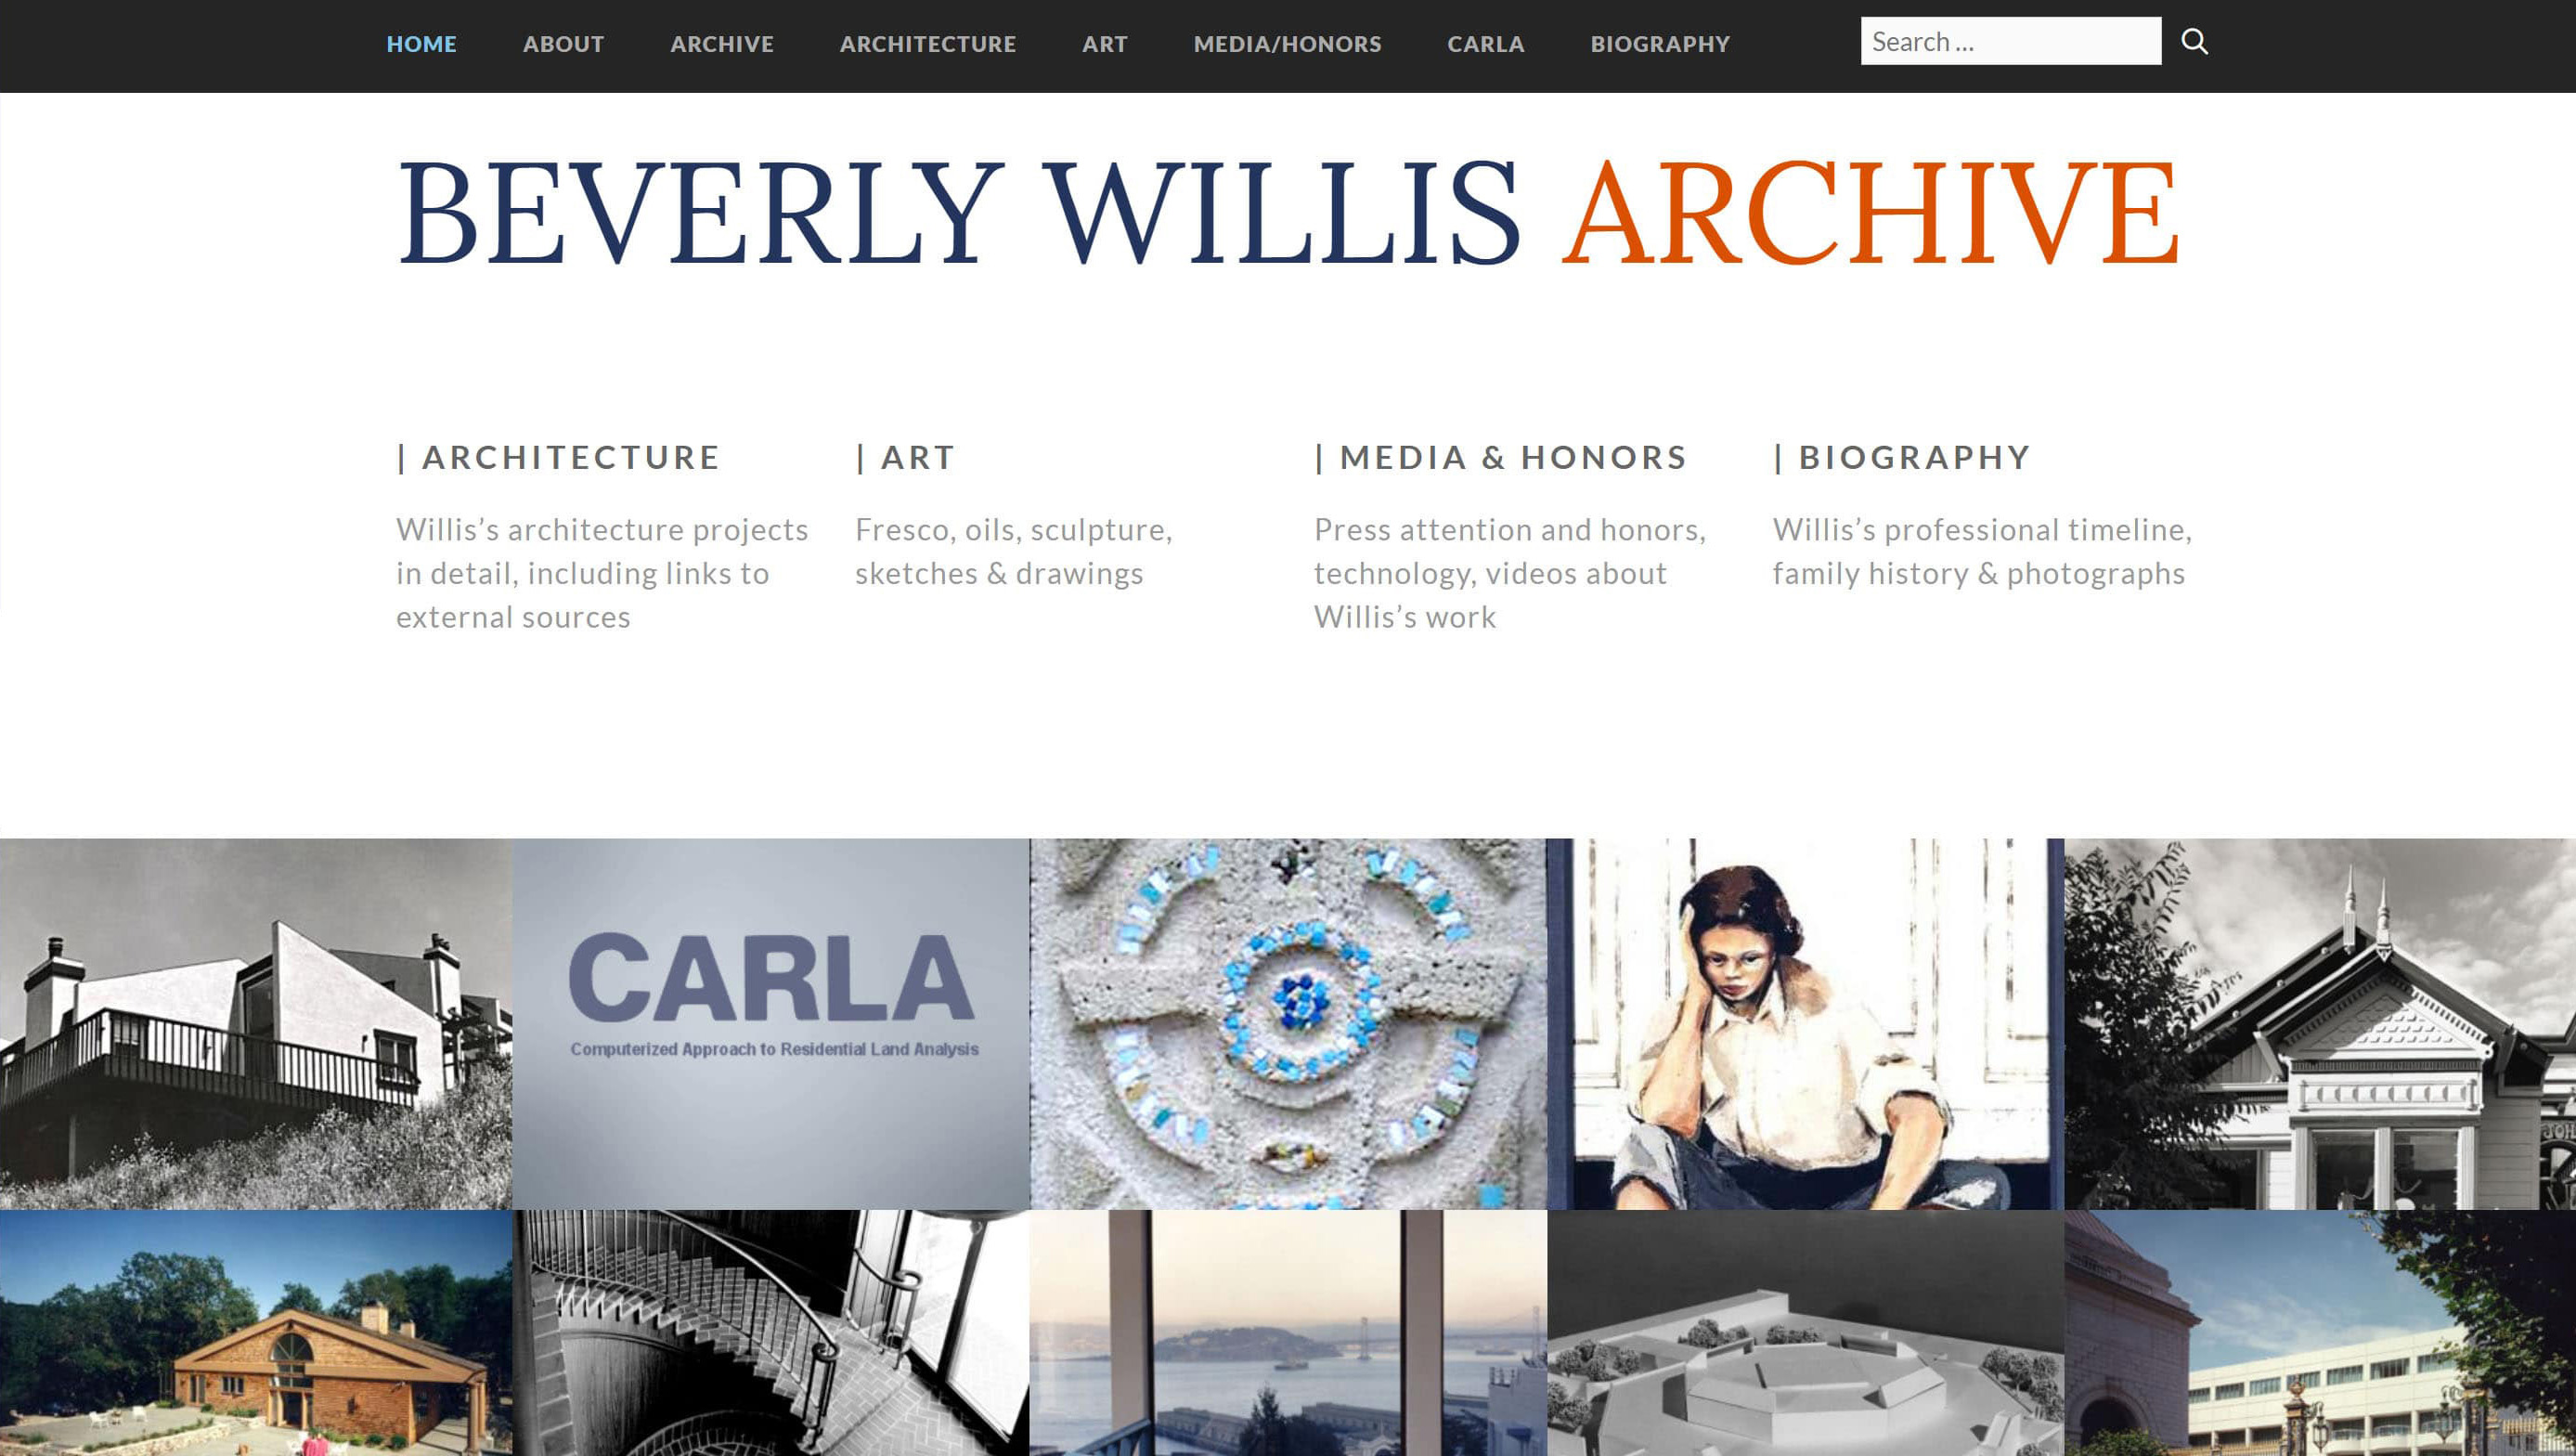 Beverly Willis Archive